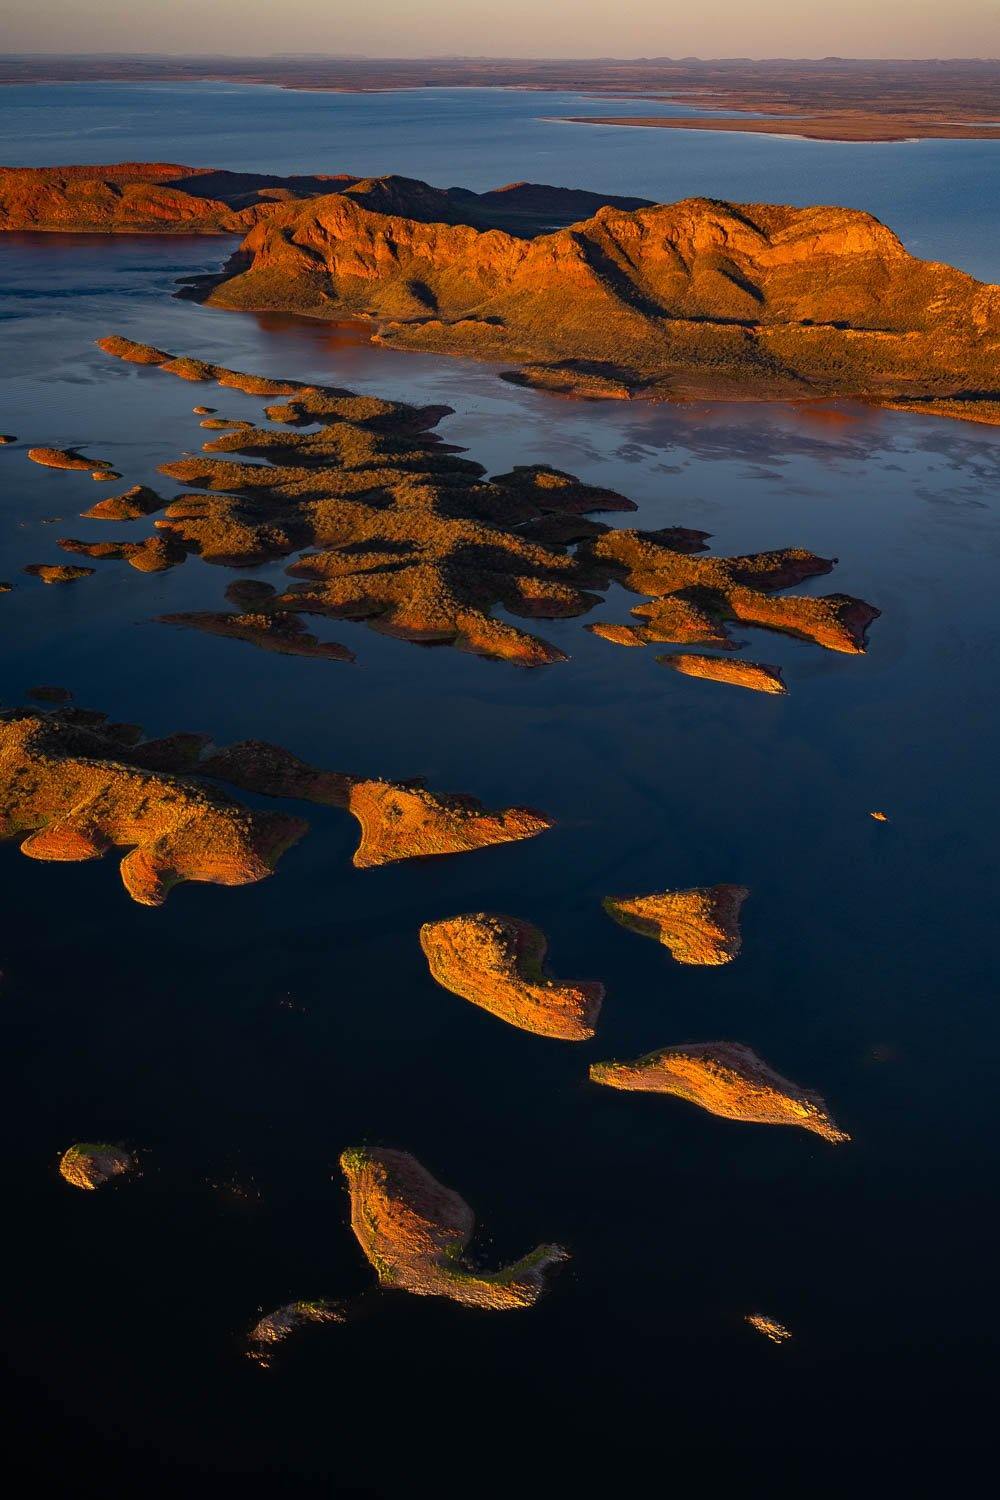 Many giant mounds of sand in the ocean, Lake Argyle #13 - The Kimberley 